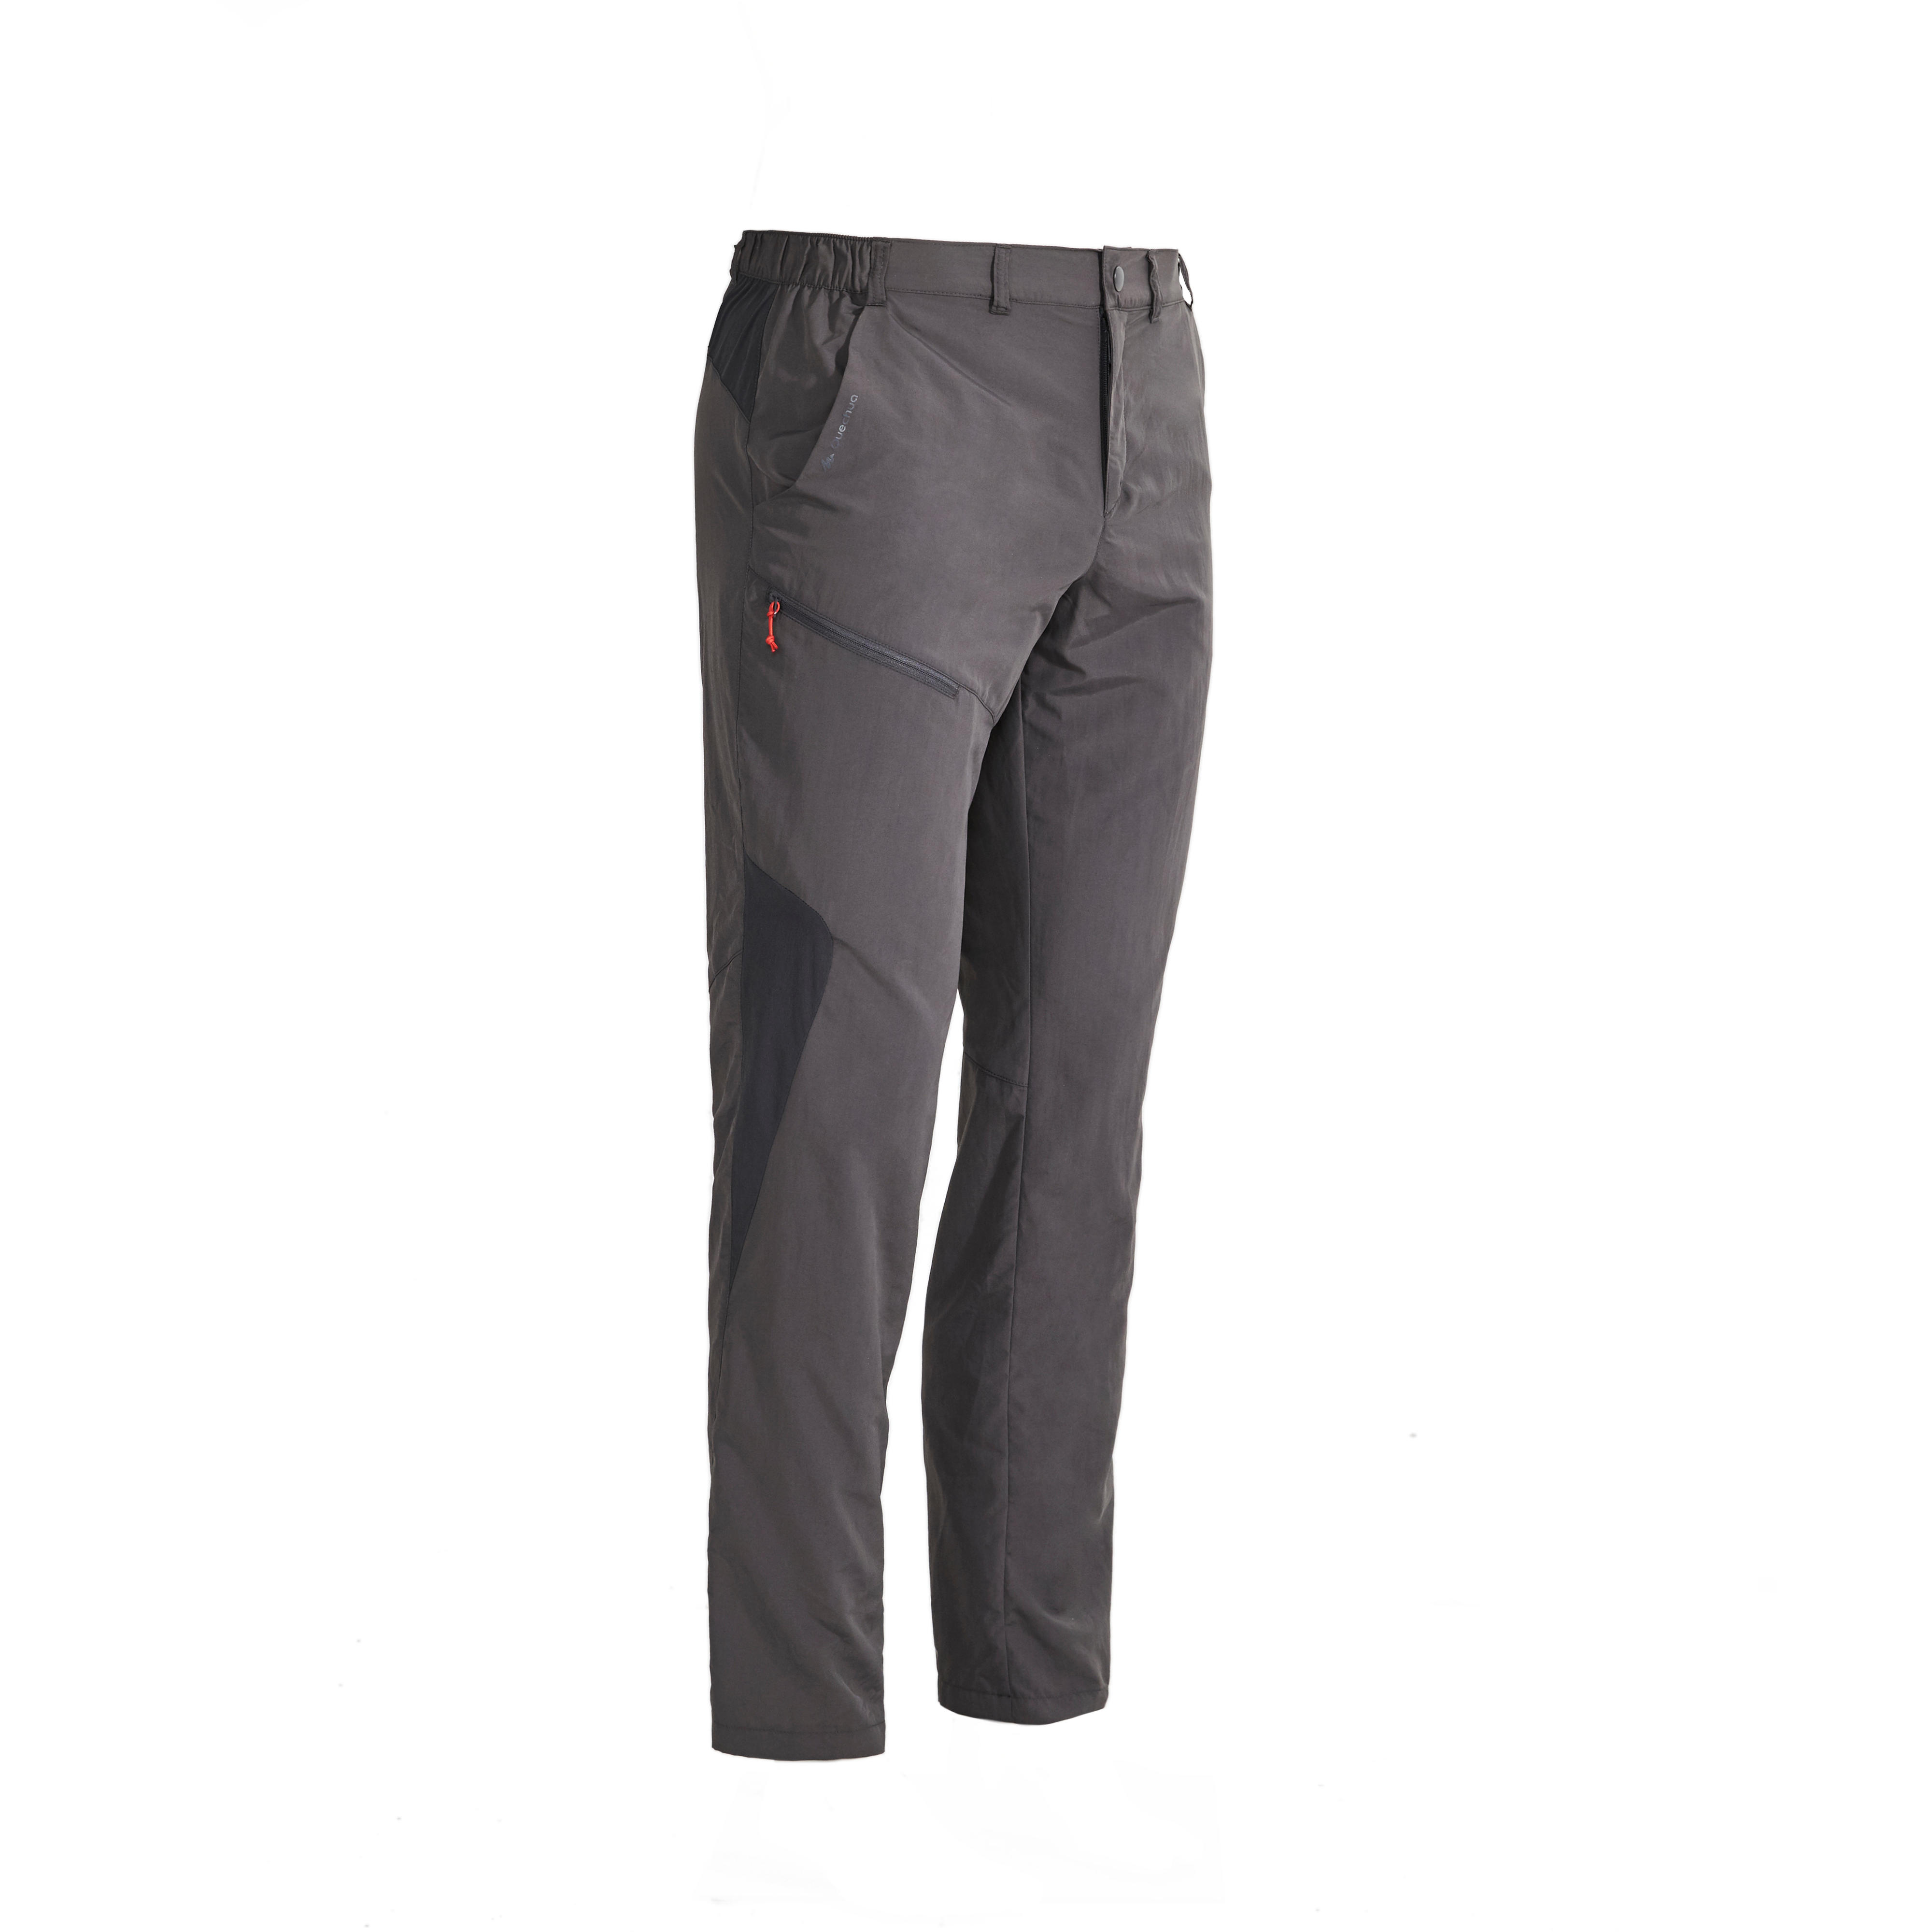 These overtrousers  Decathlon Sports India  Belapur  Facebook